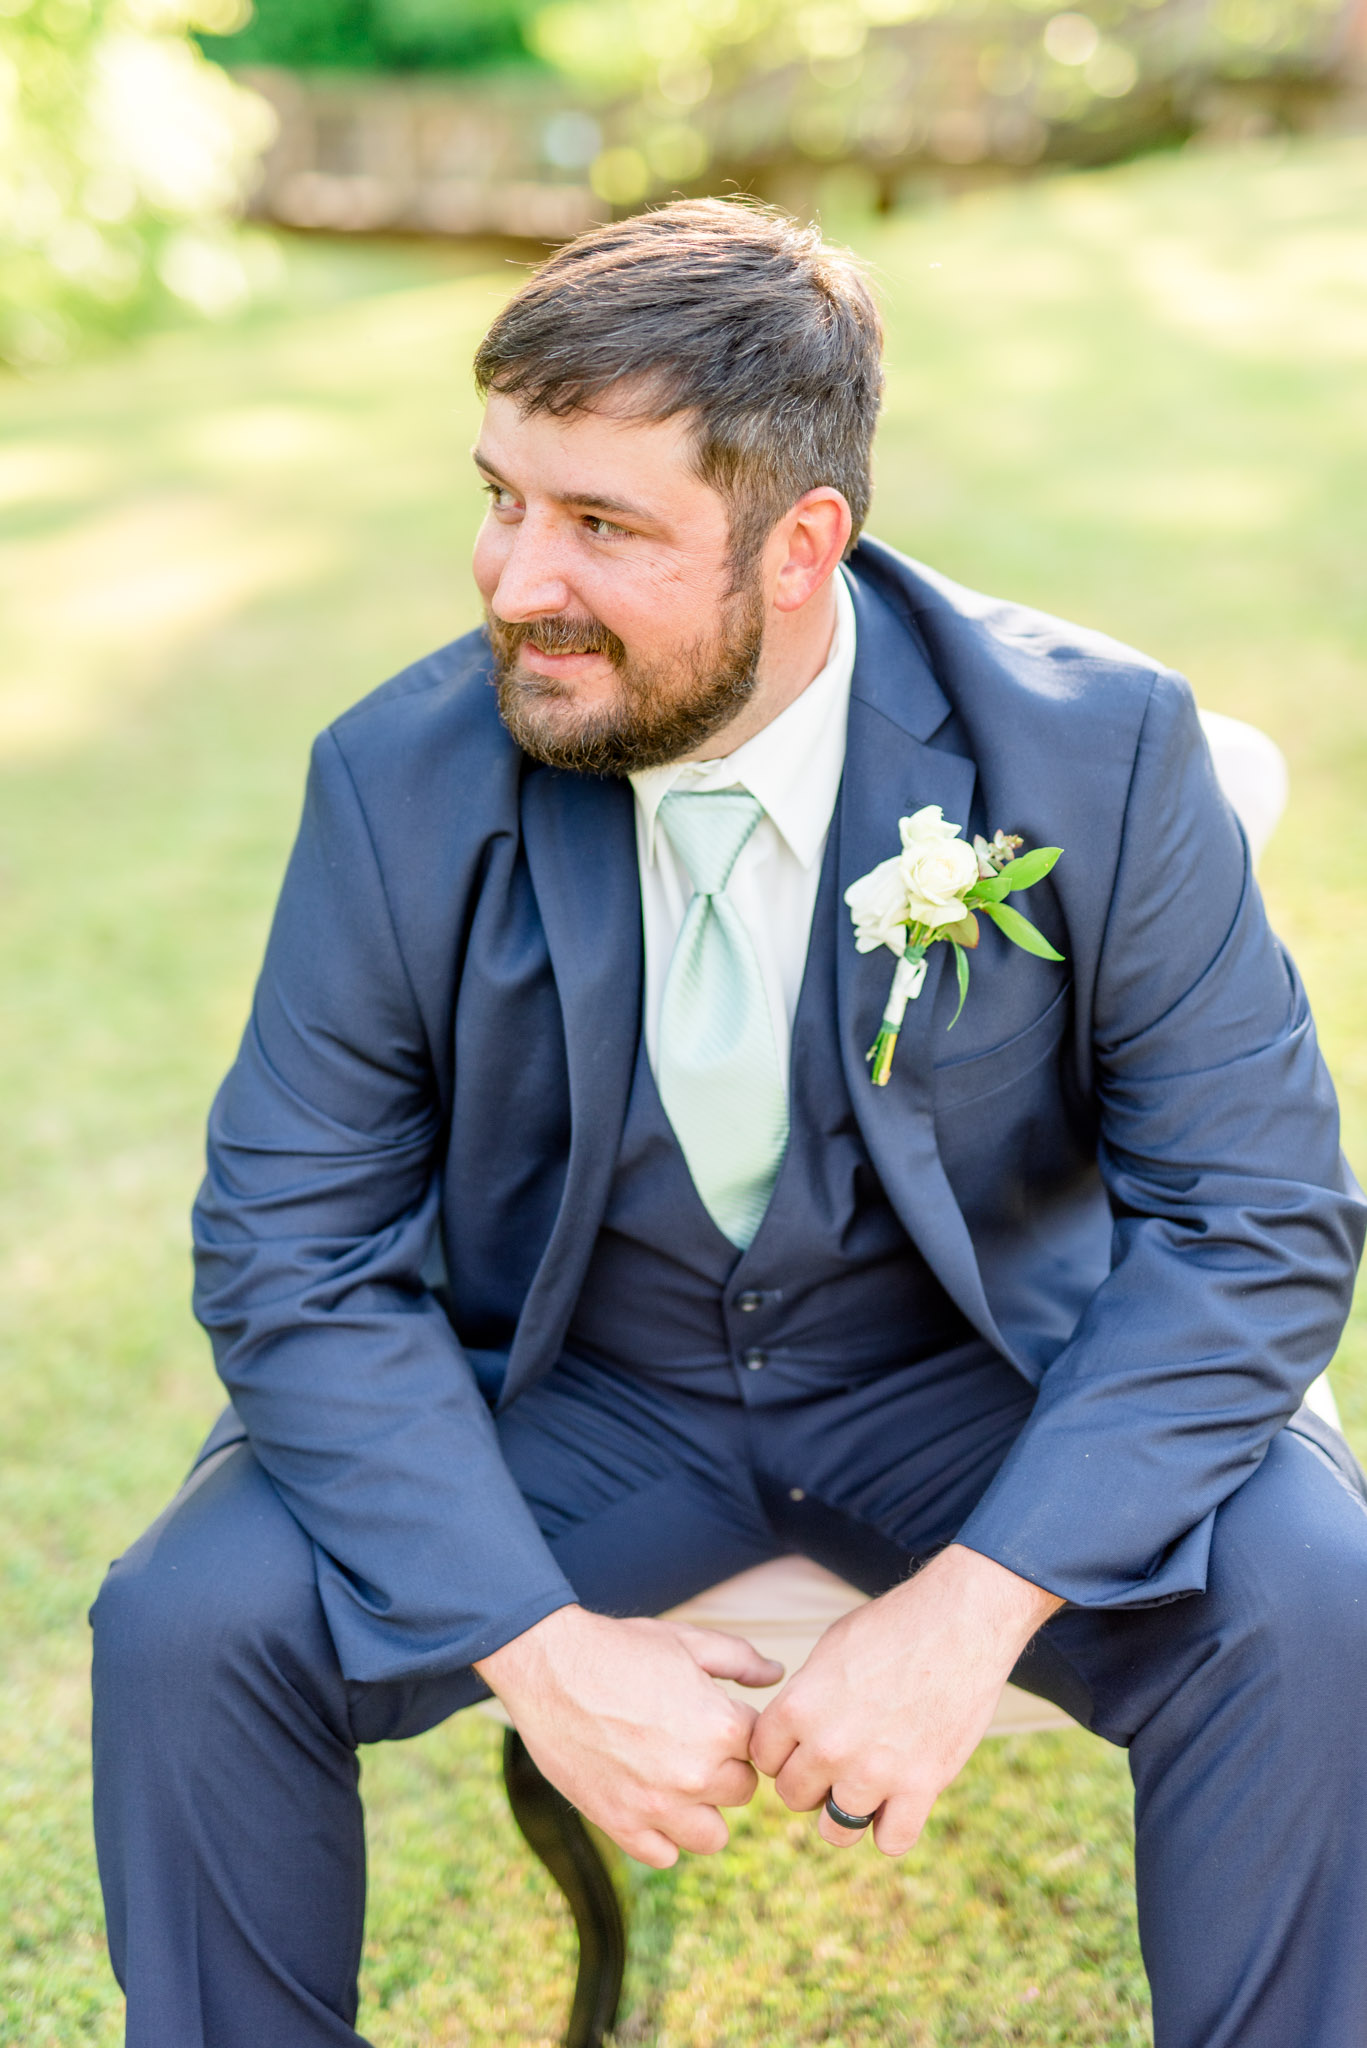 Groom looks over shoulder while sitting.